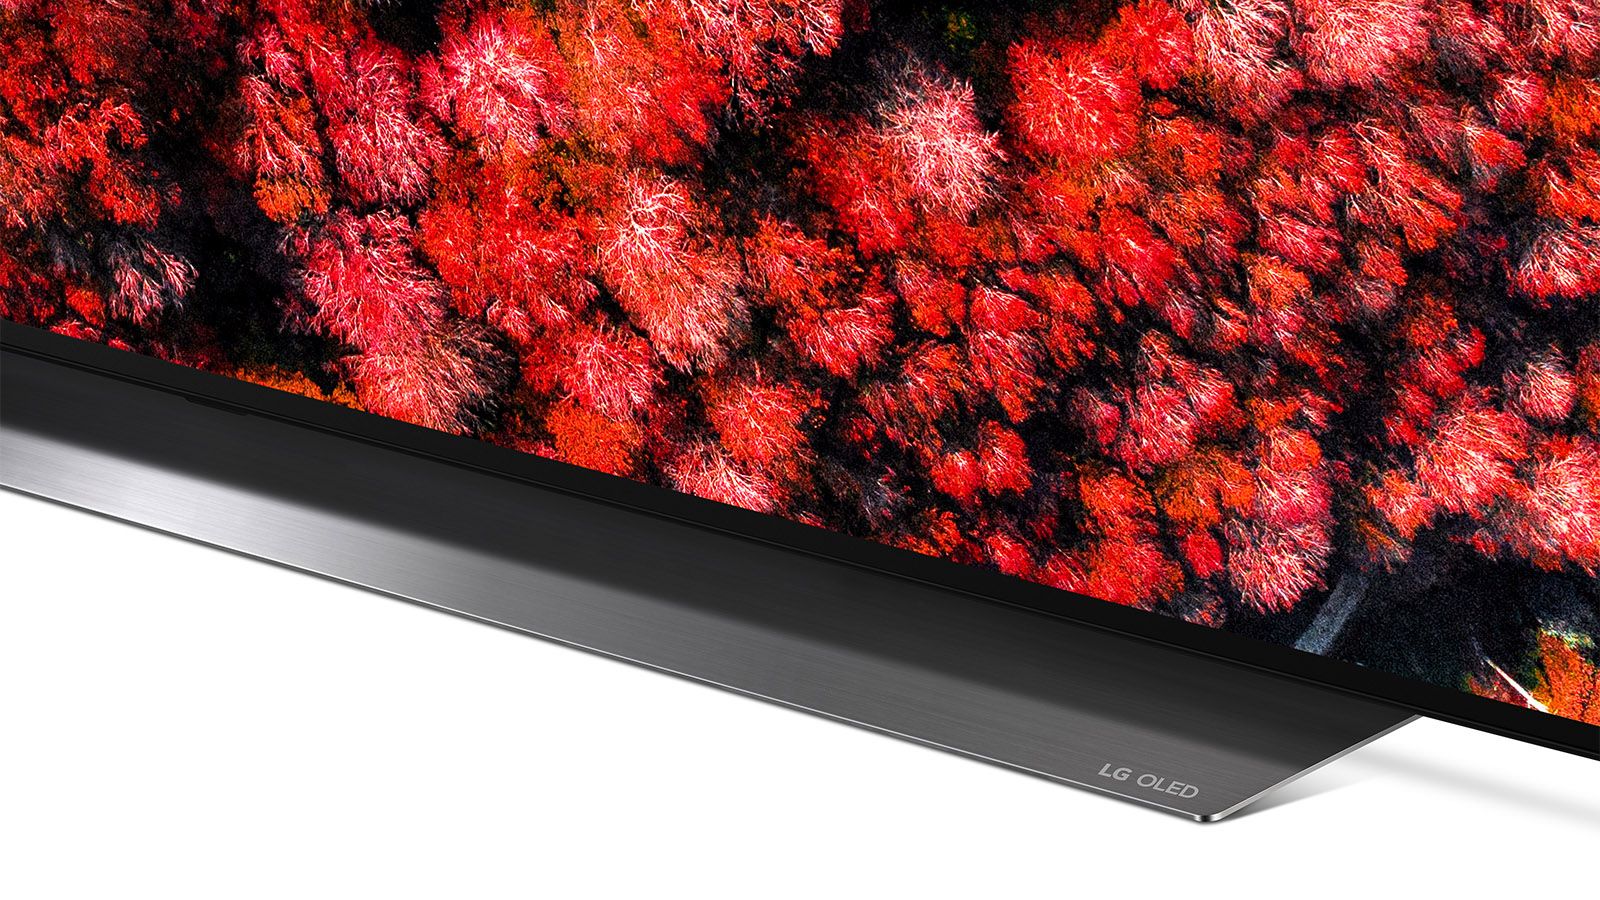 LG OLED C9 TV review image 6